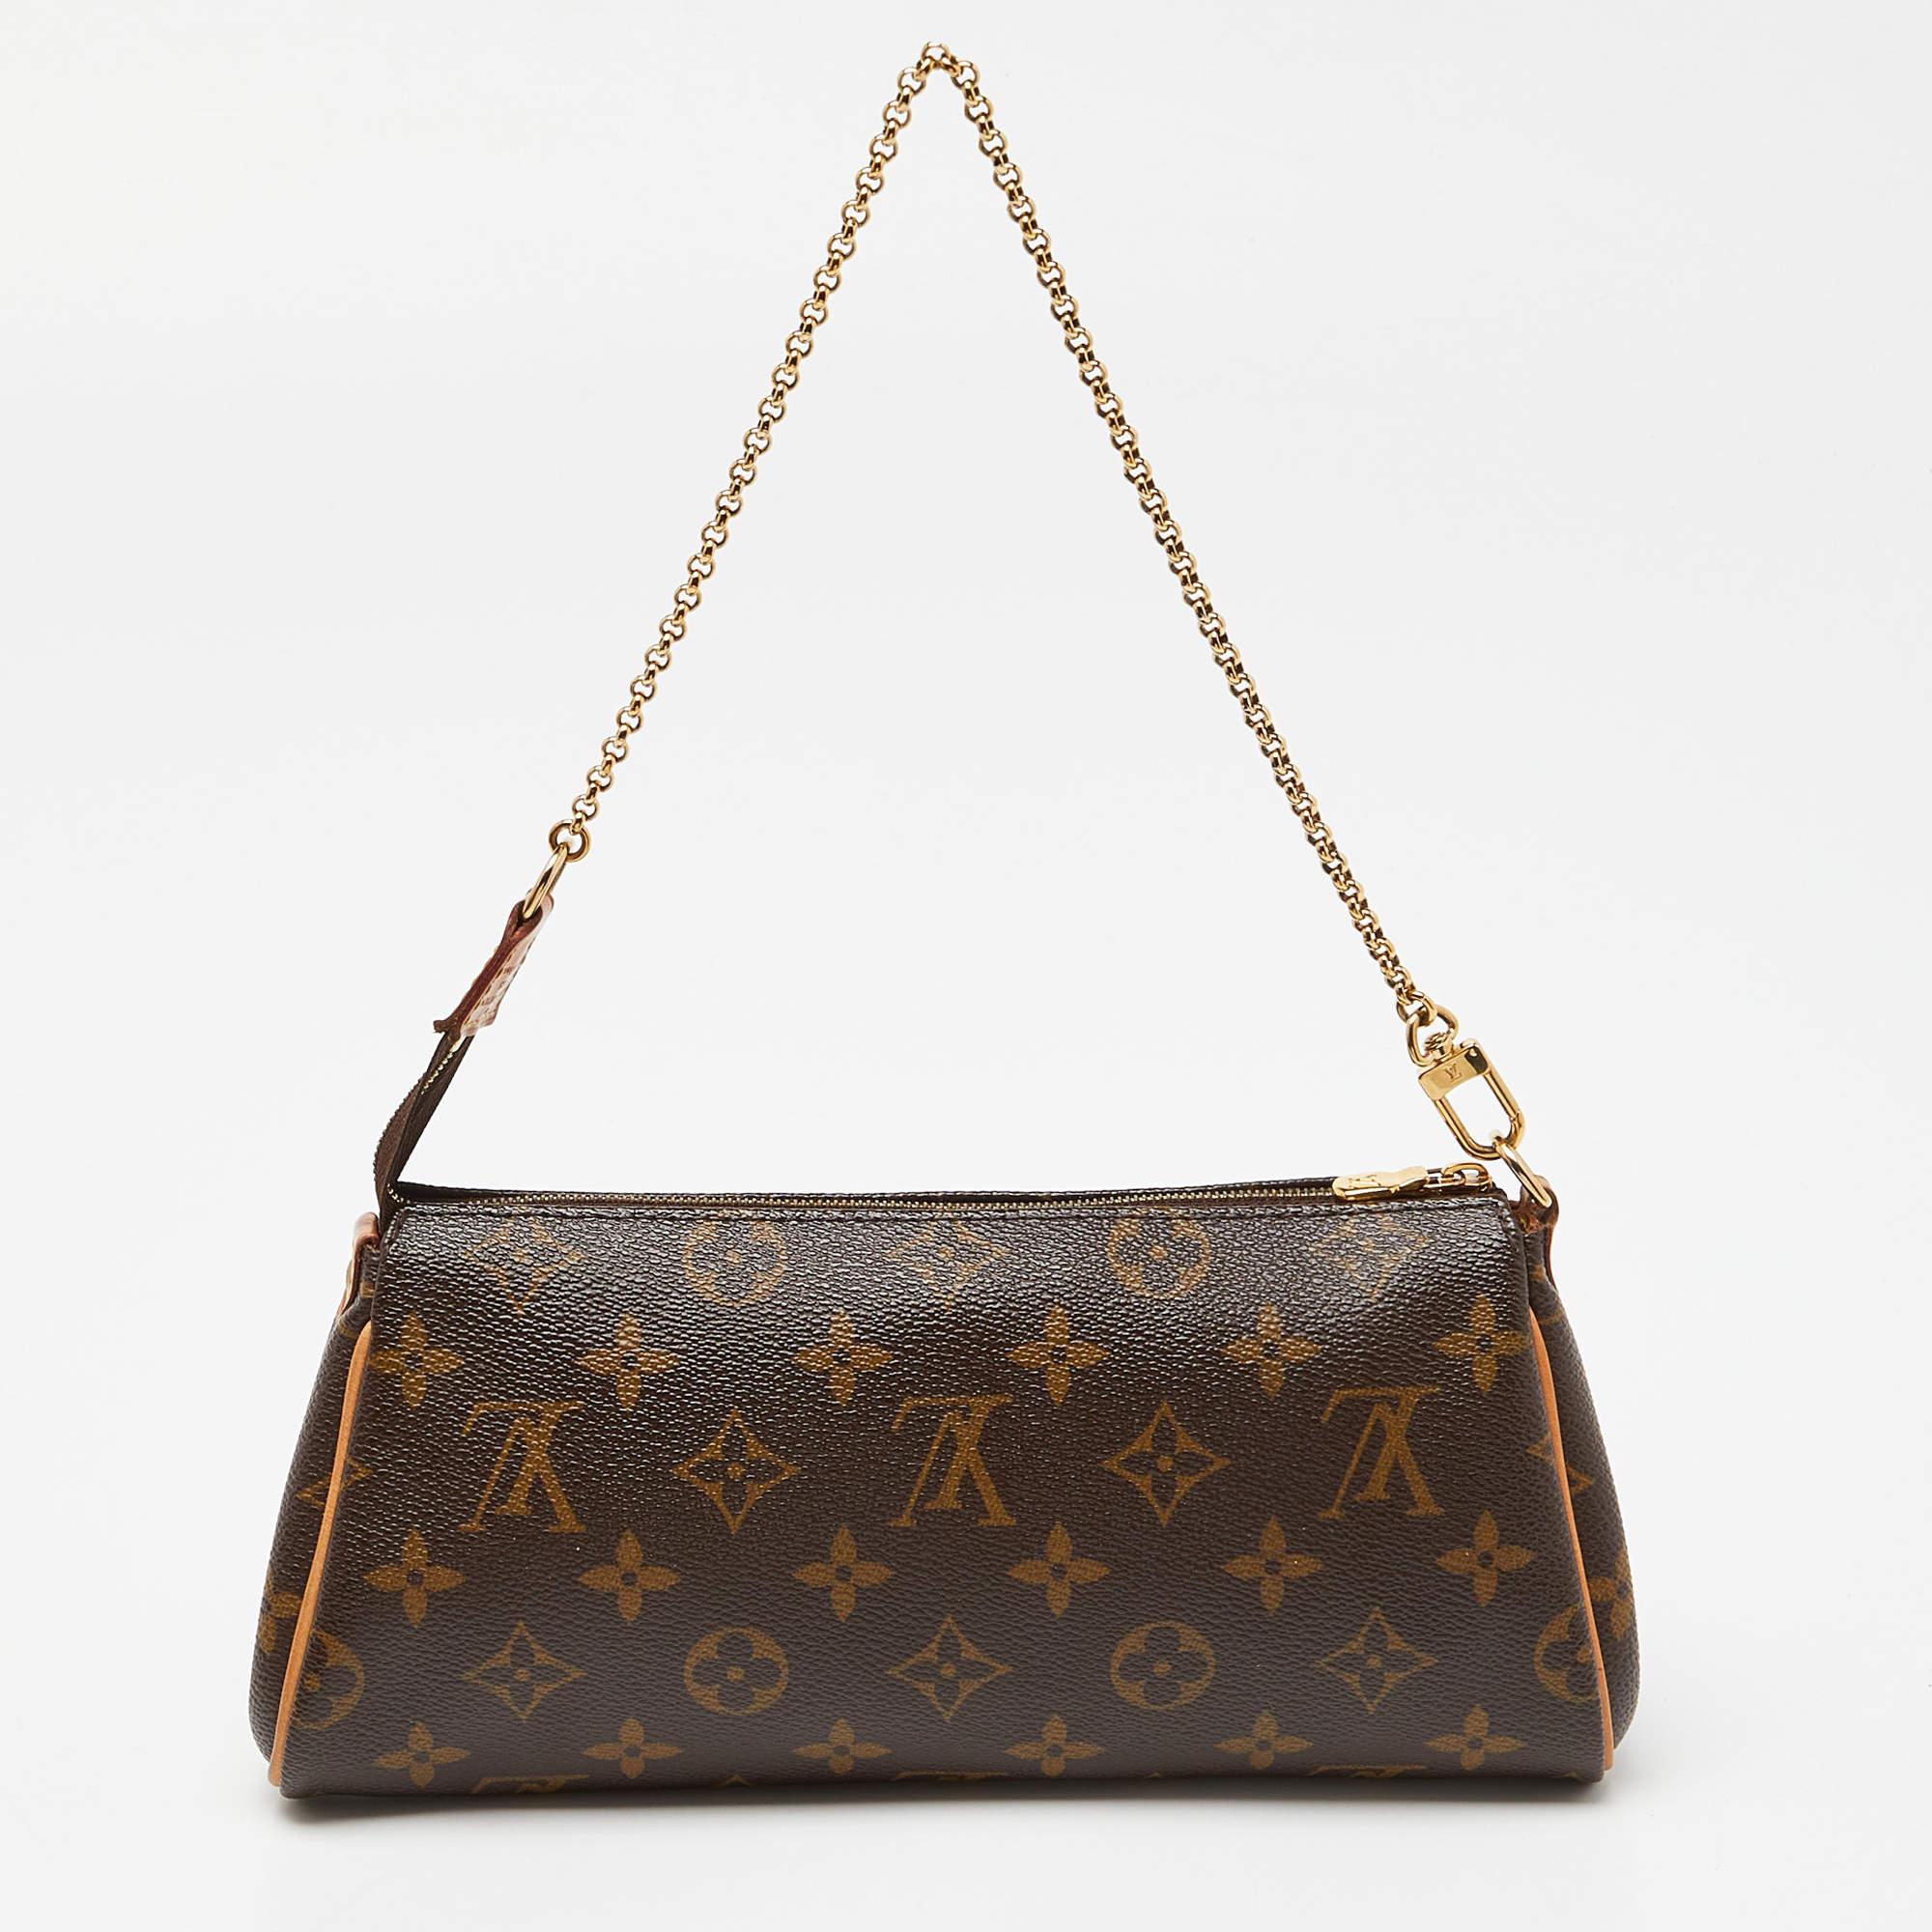 Crafted from Monogram canvas, this Eva Pochette bag is a creation by Louis Vuitton. The bag features a well-sized interior that is secured by a zipper.

Includes: Original Dustbag, Original Box

